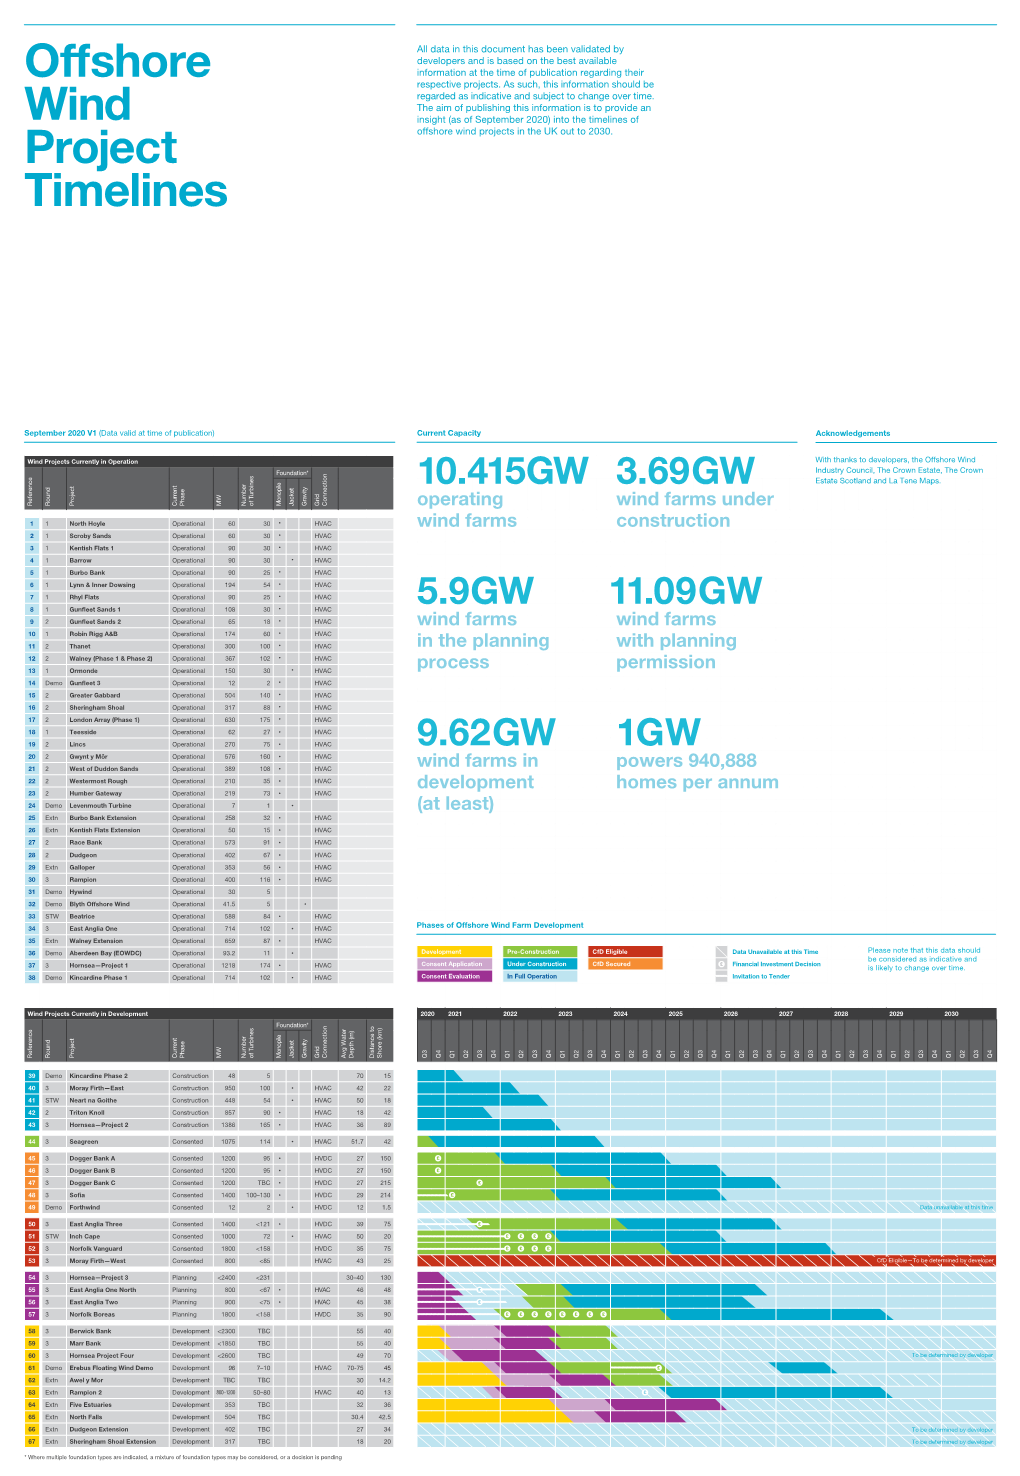 Offshore Wind Project Timelines